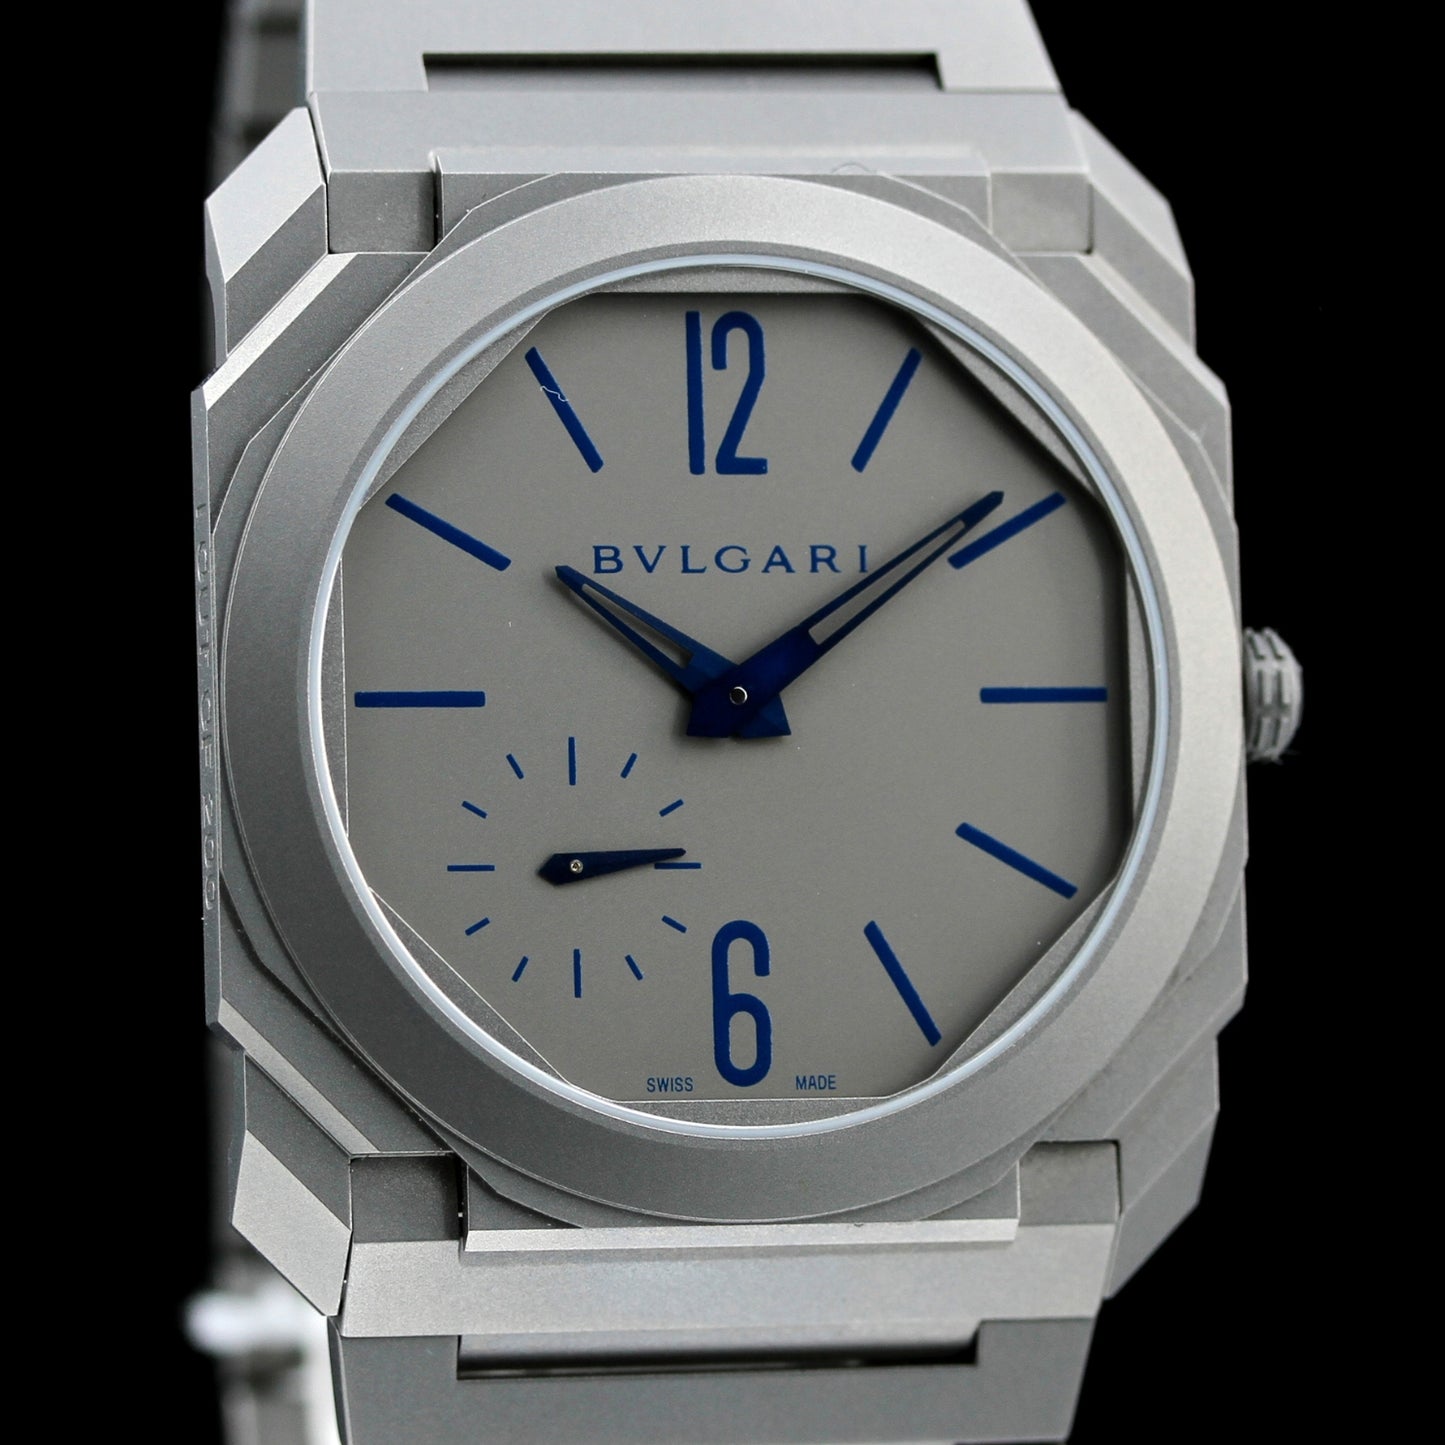 Bulgari Octa Finissimo, limited 1 out of 200, Ref. 102945, 2019, B+P